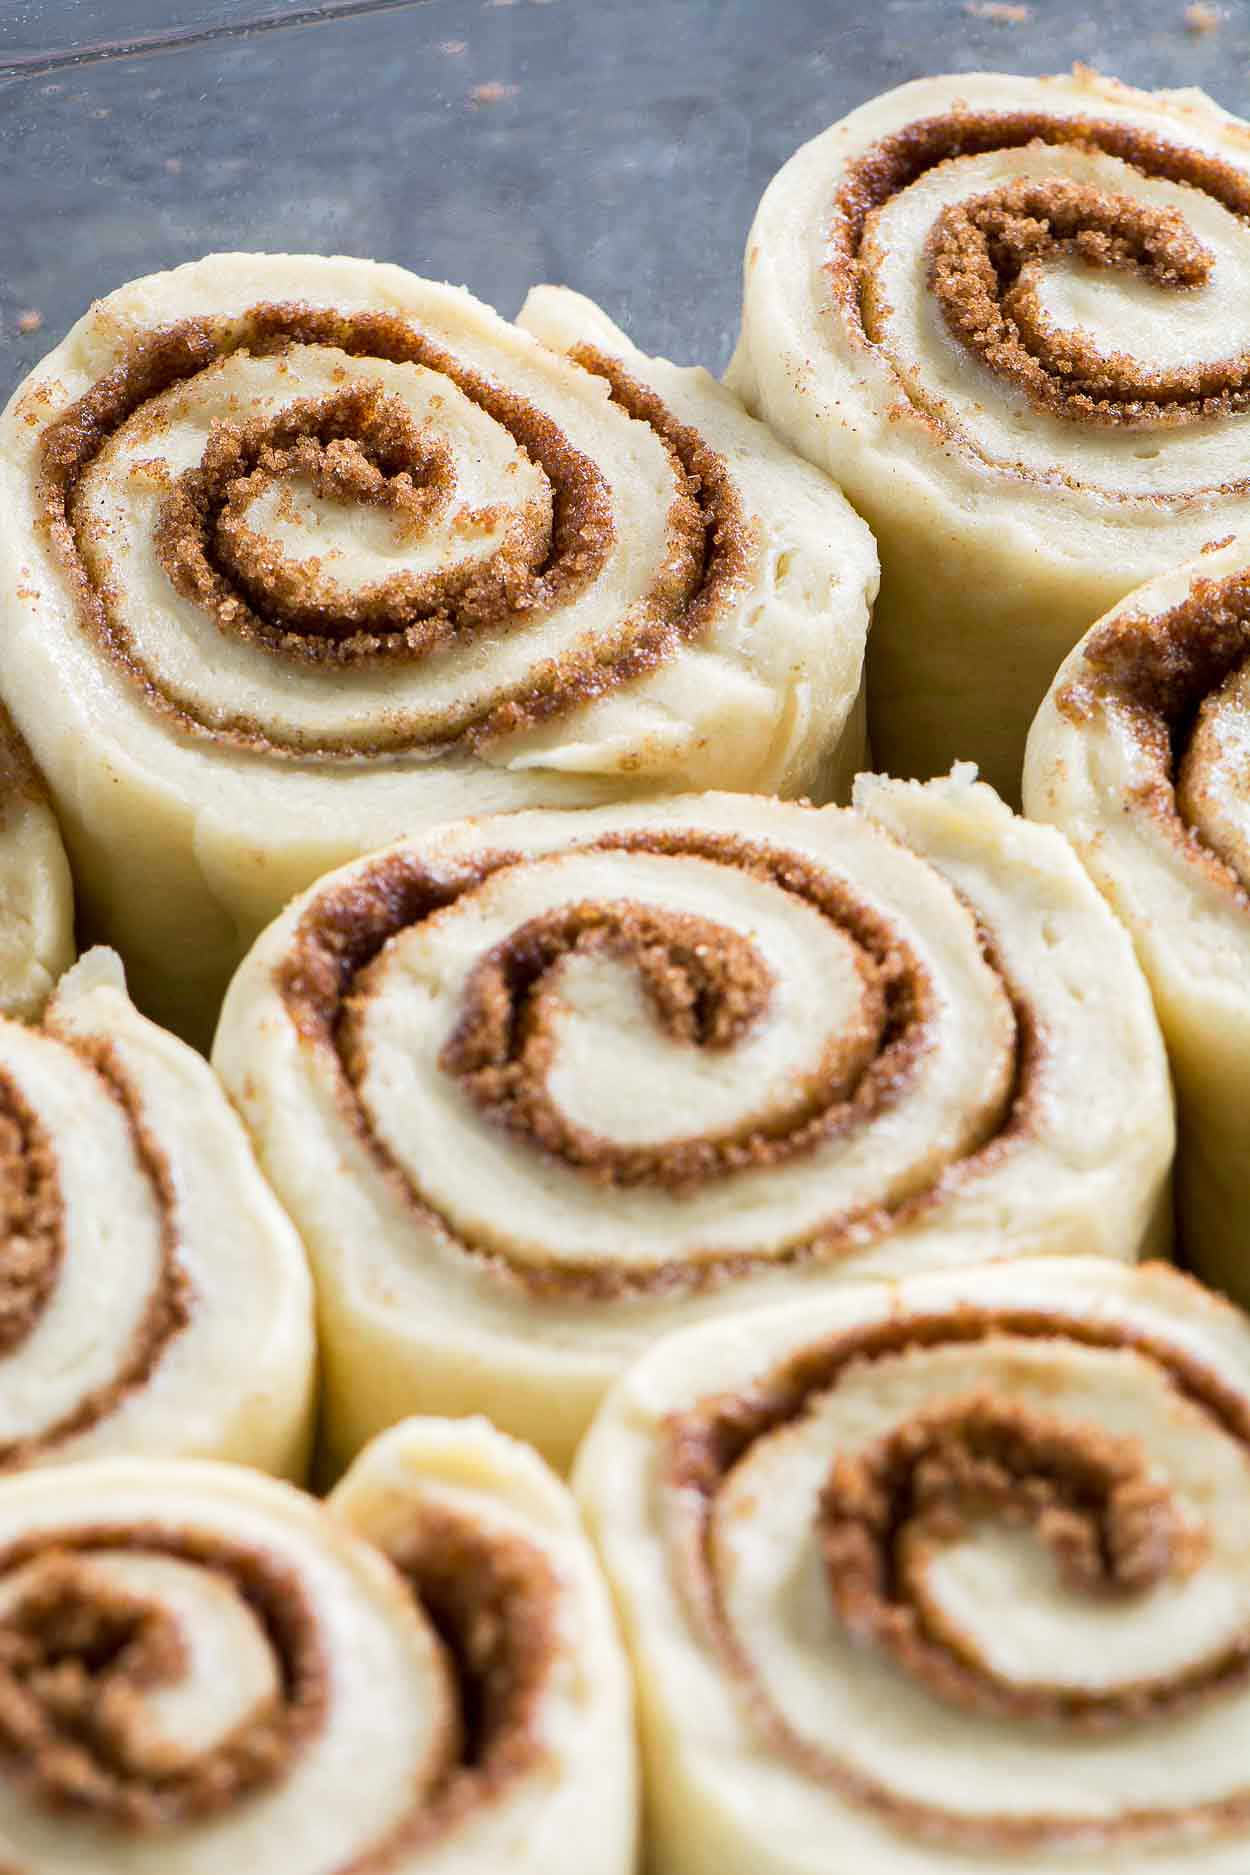 Made from scratch jumbo cinnamon rolls that are light and flaky. Filled with brown sugar, cinnamon and topped with a generous layer of cream cheese icing. | simplerevisions.com